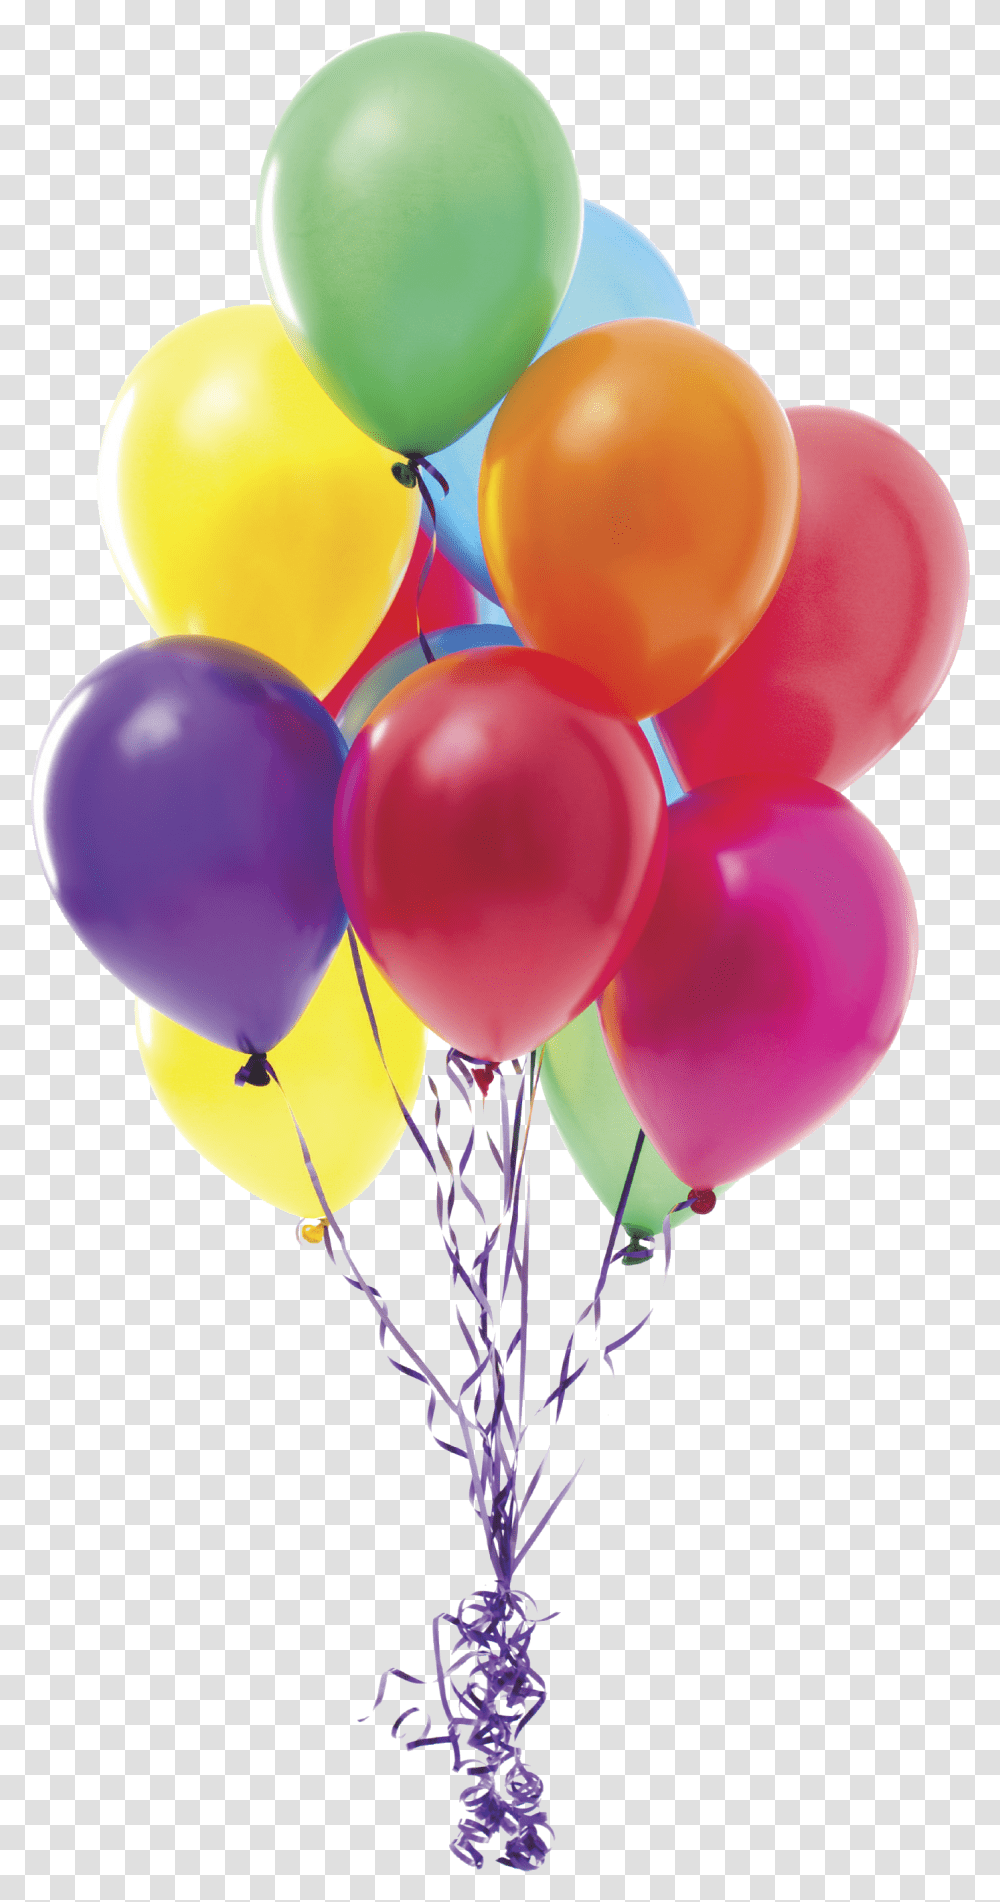 Balloon Clipart Free Balloons Images Download Free Real Birthday Balloons Transparent Png